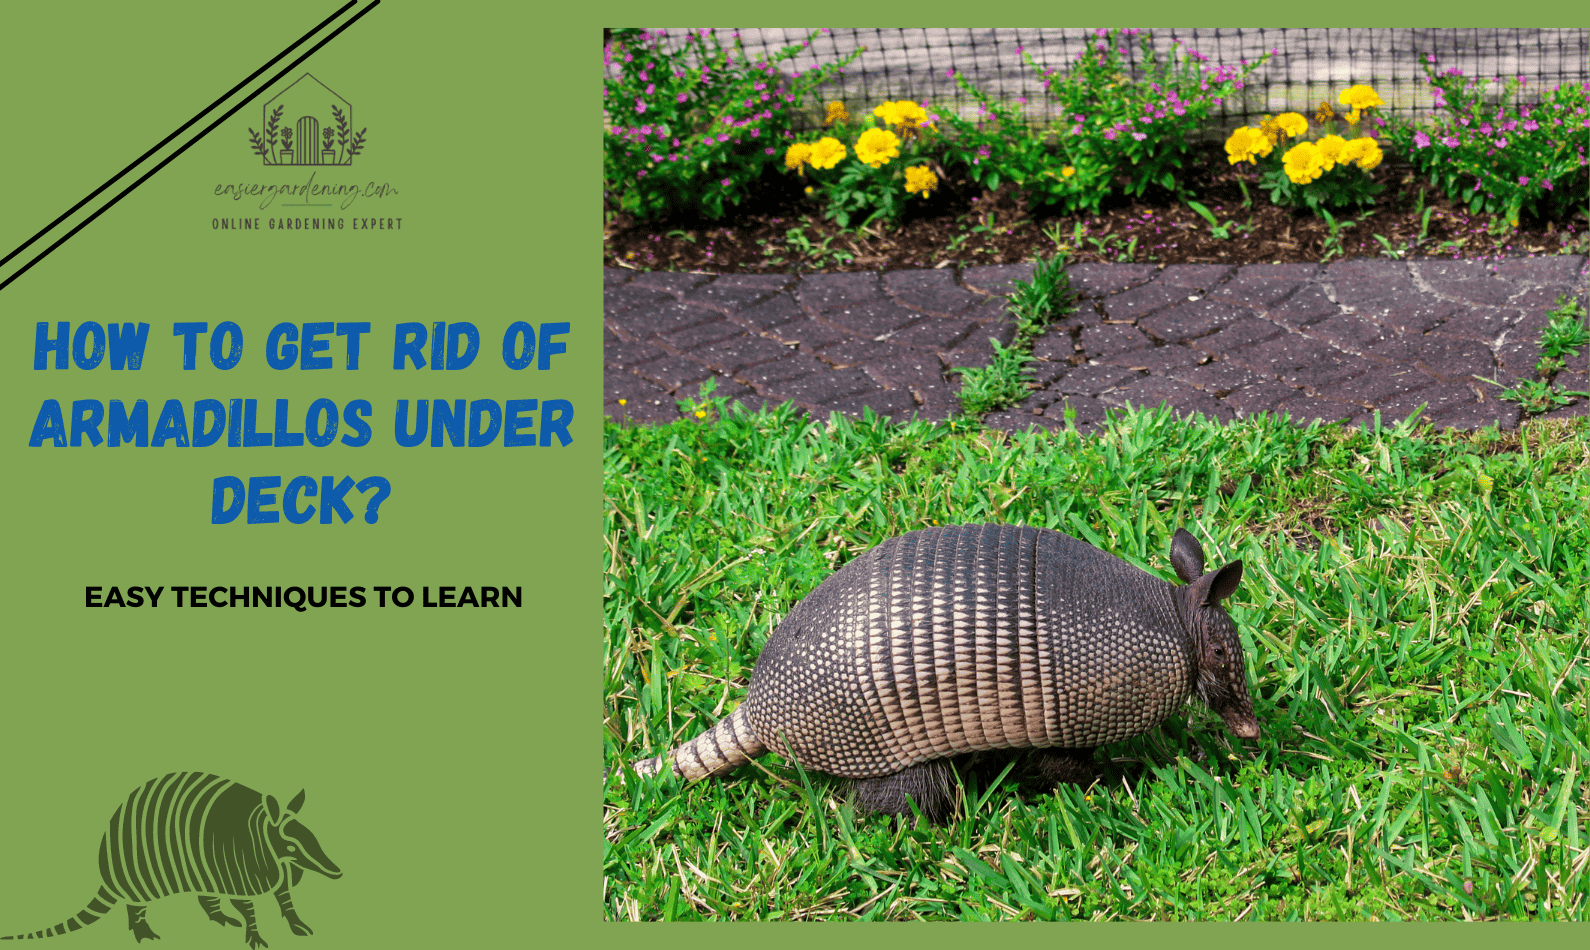 How to Get Rid of Armadillos Under Deck?